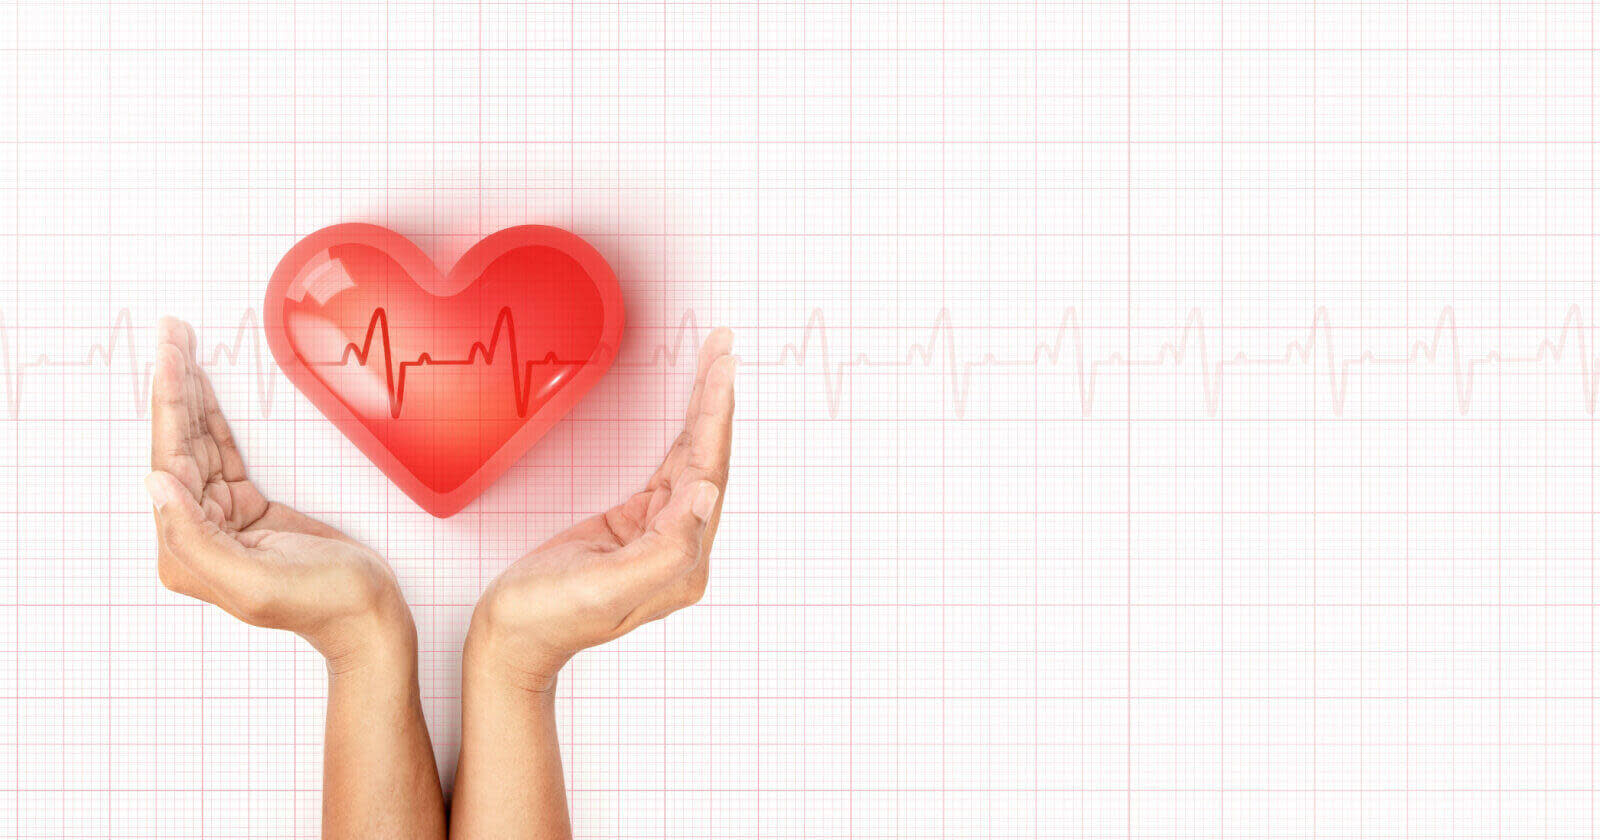 Cardiovascular health in women and gender differences in heart disease
